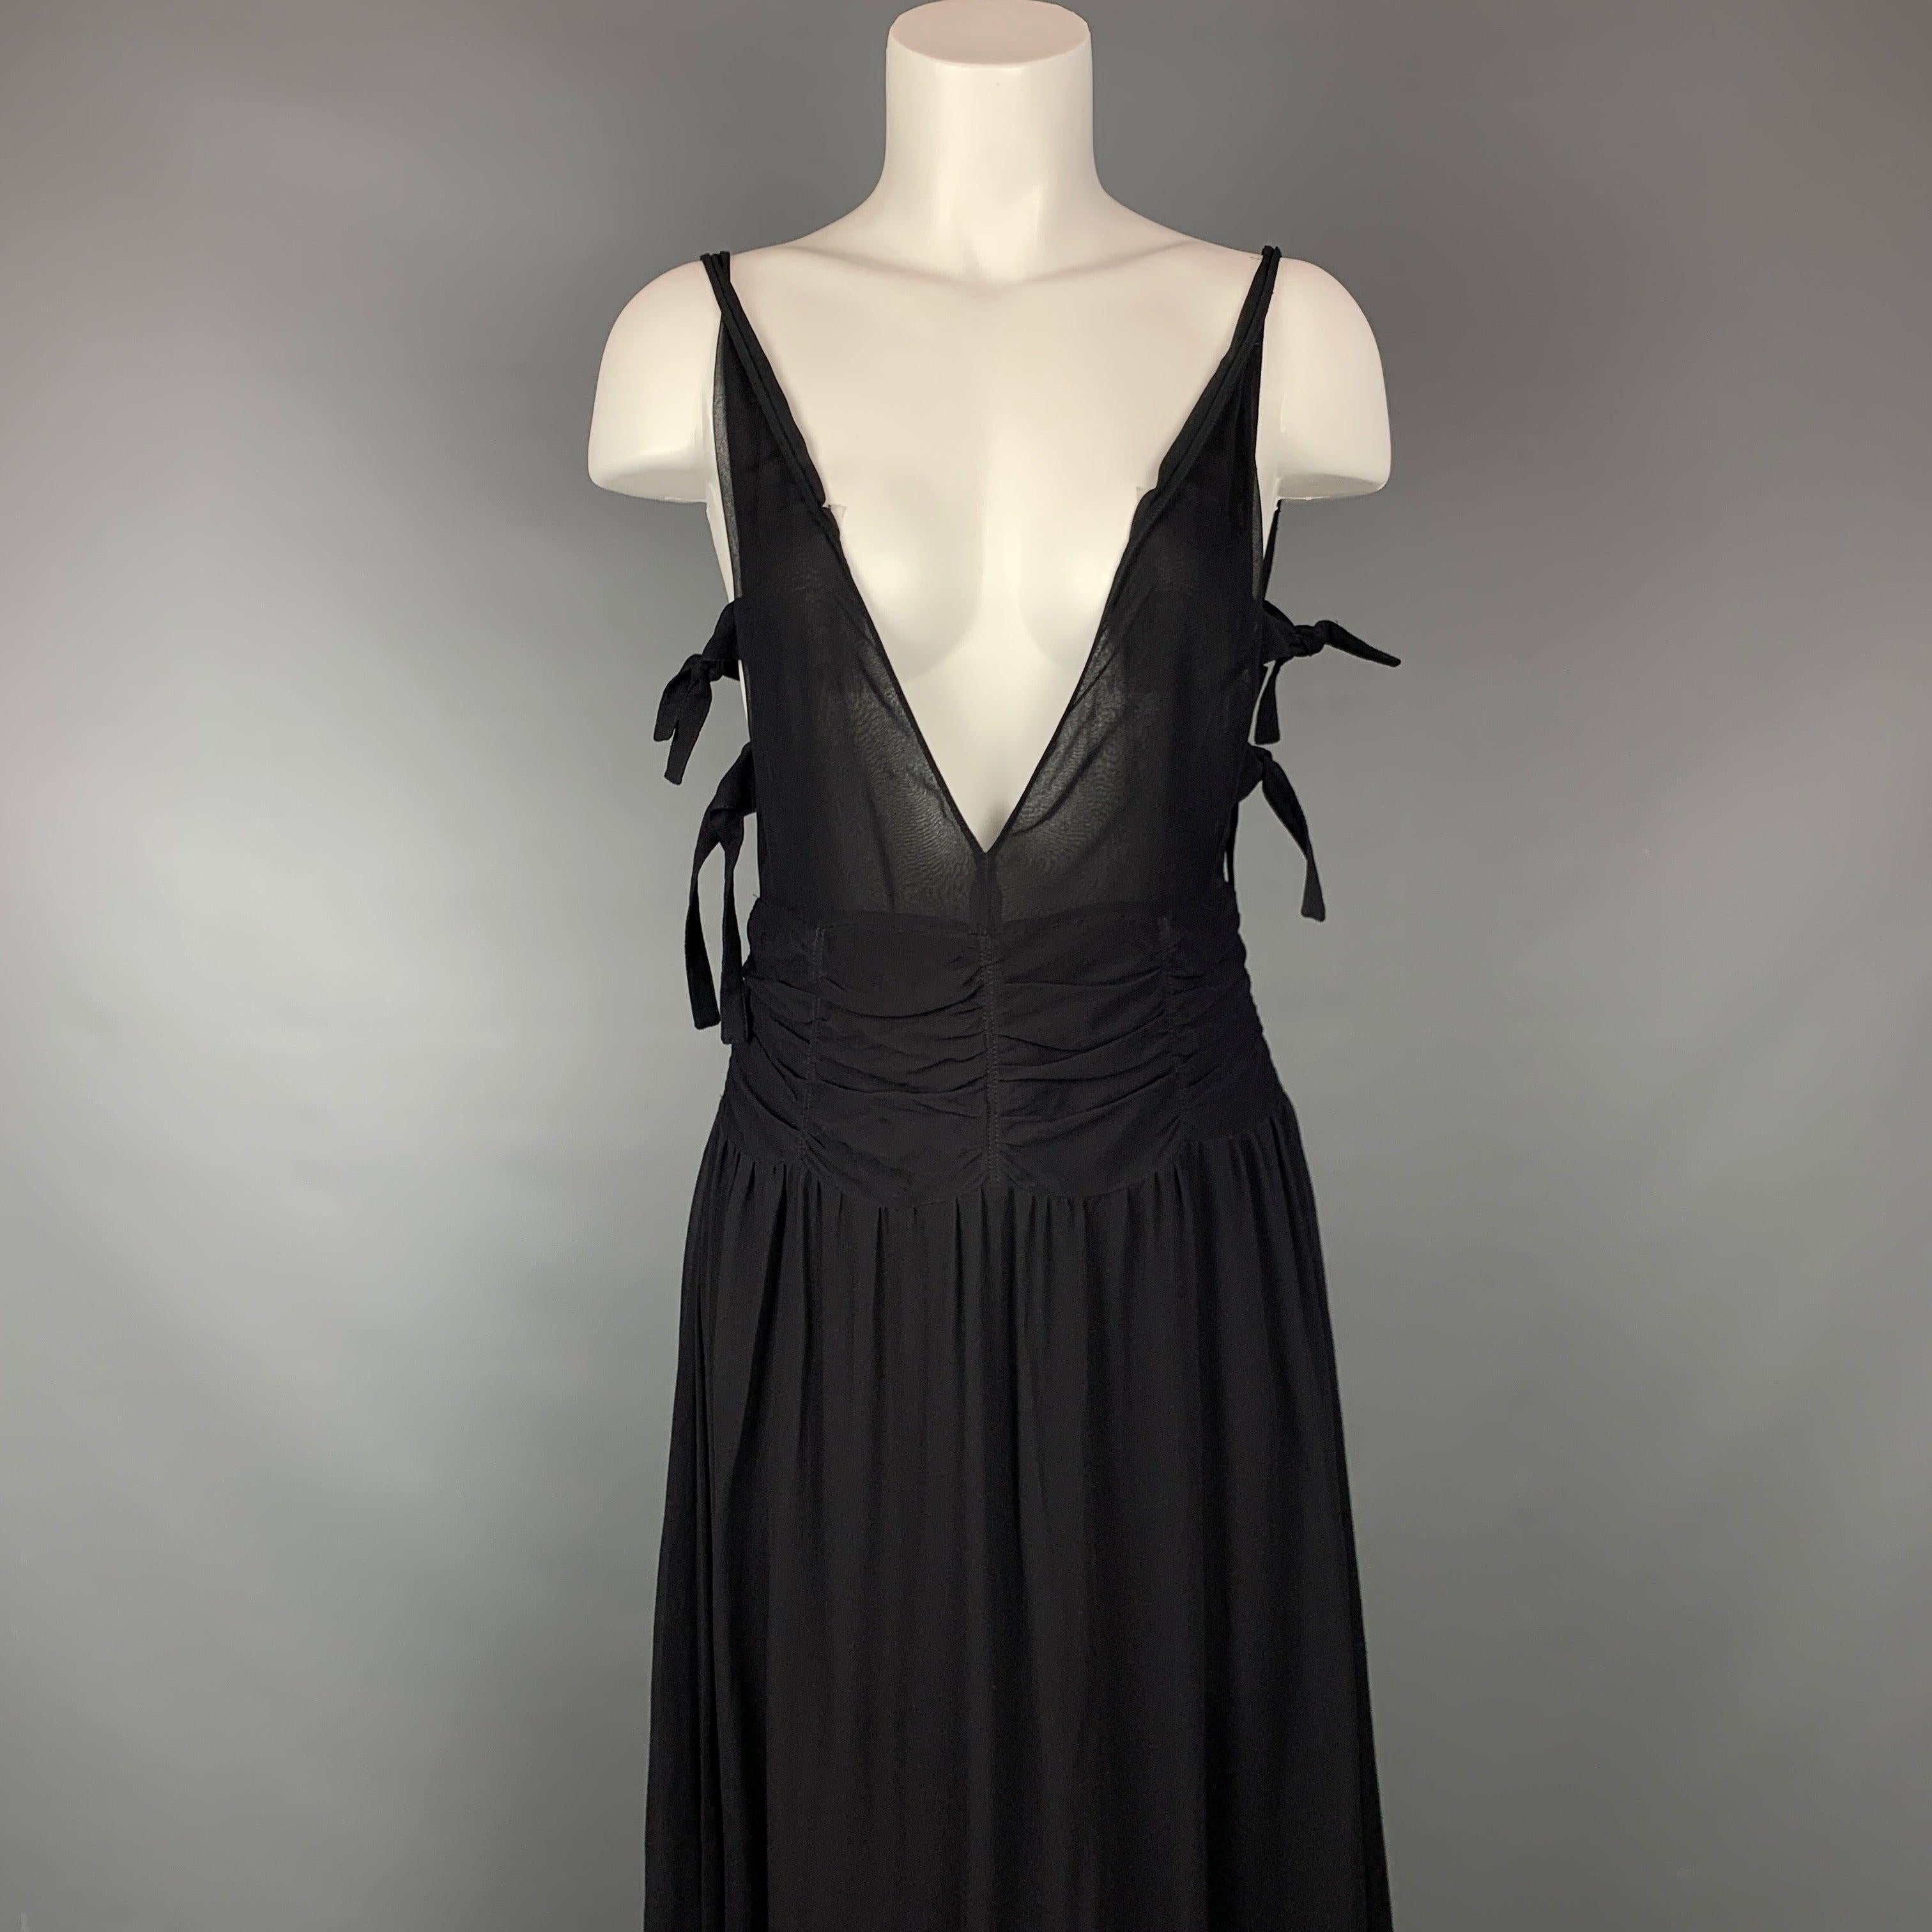 EMPORIO ARMANI 2002 gown comes in a black chiffon material featuring an a-line style, ruched design, side tie details, plunging v-neck, and a back zip up closure.
Made in Italy. Very Good
Pre-Owned Condition. 

Marked:  42 

Measurements: 
 Bust: 28